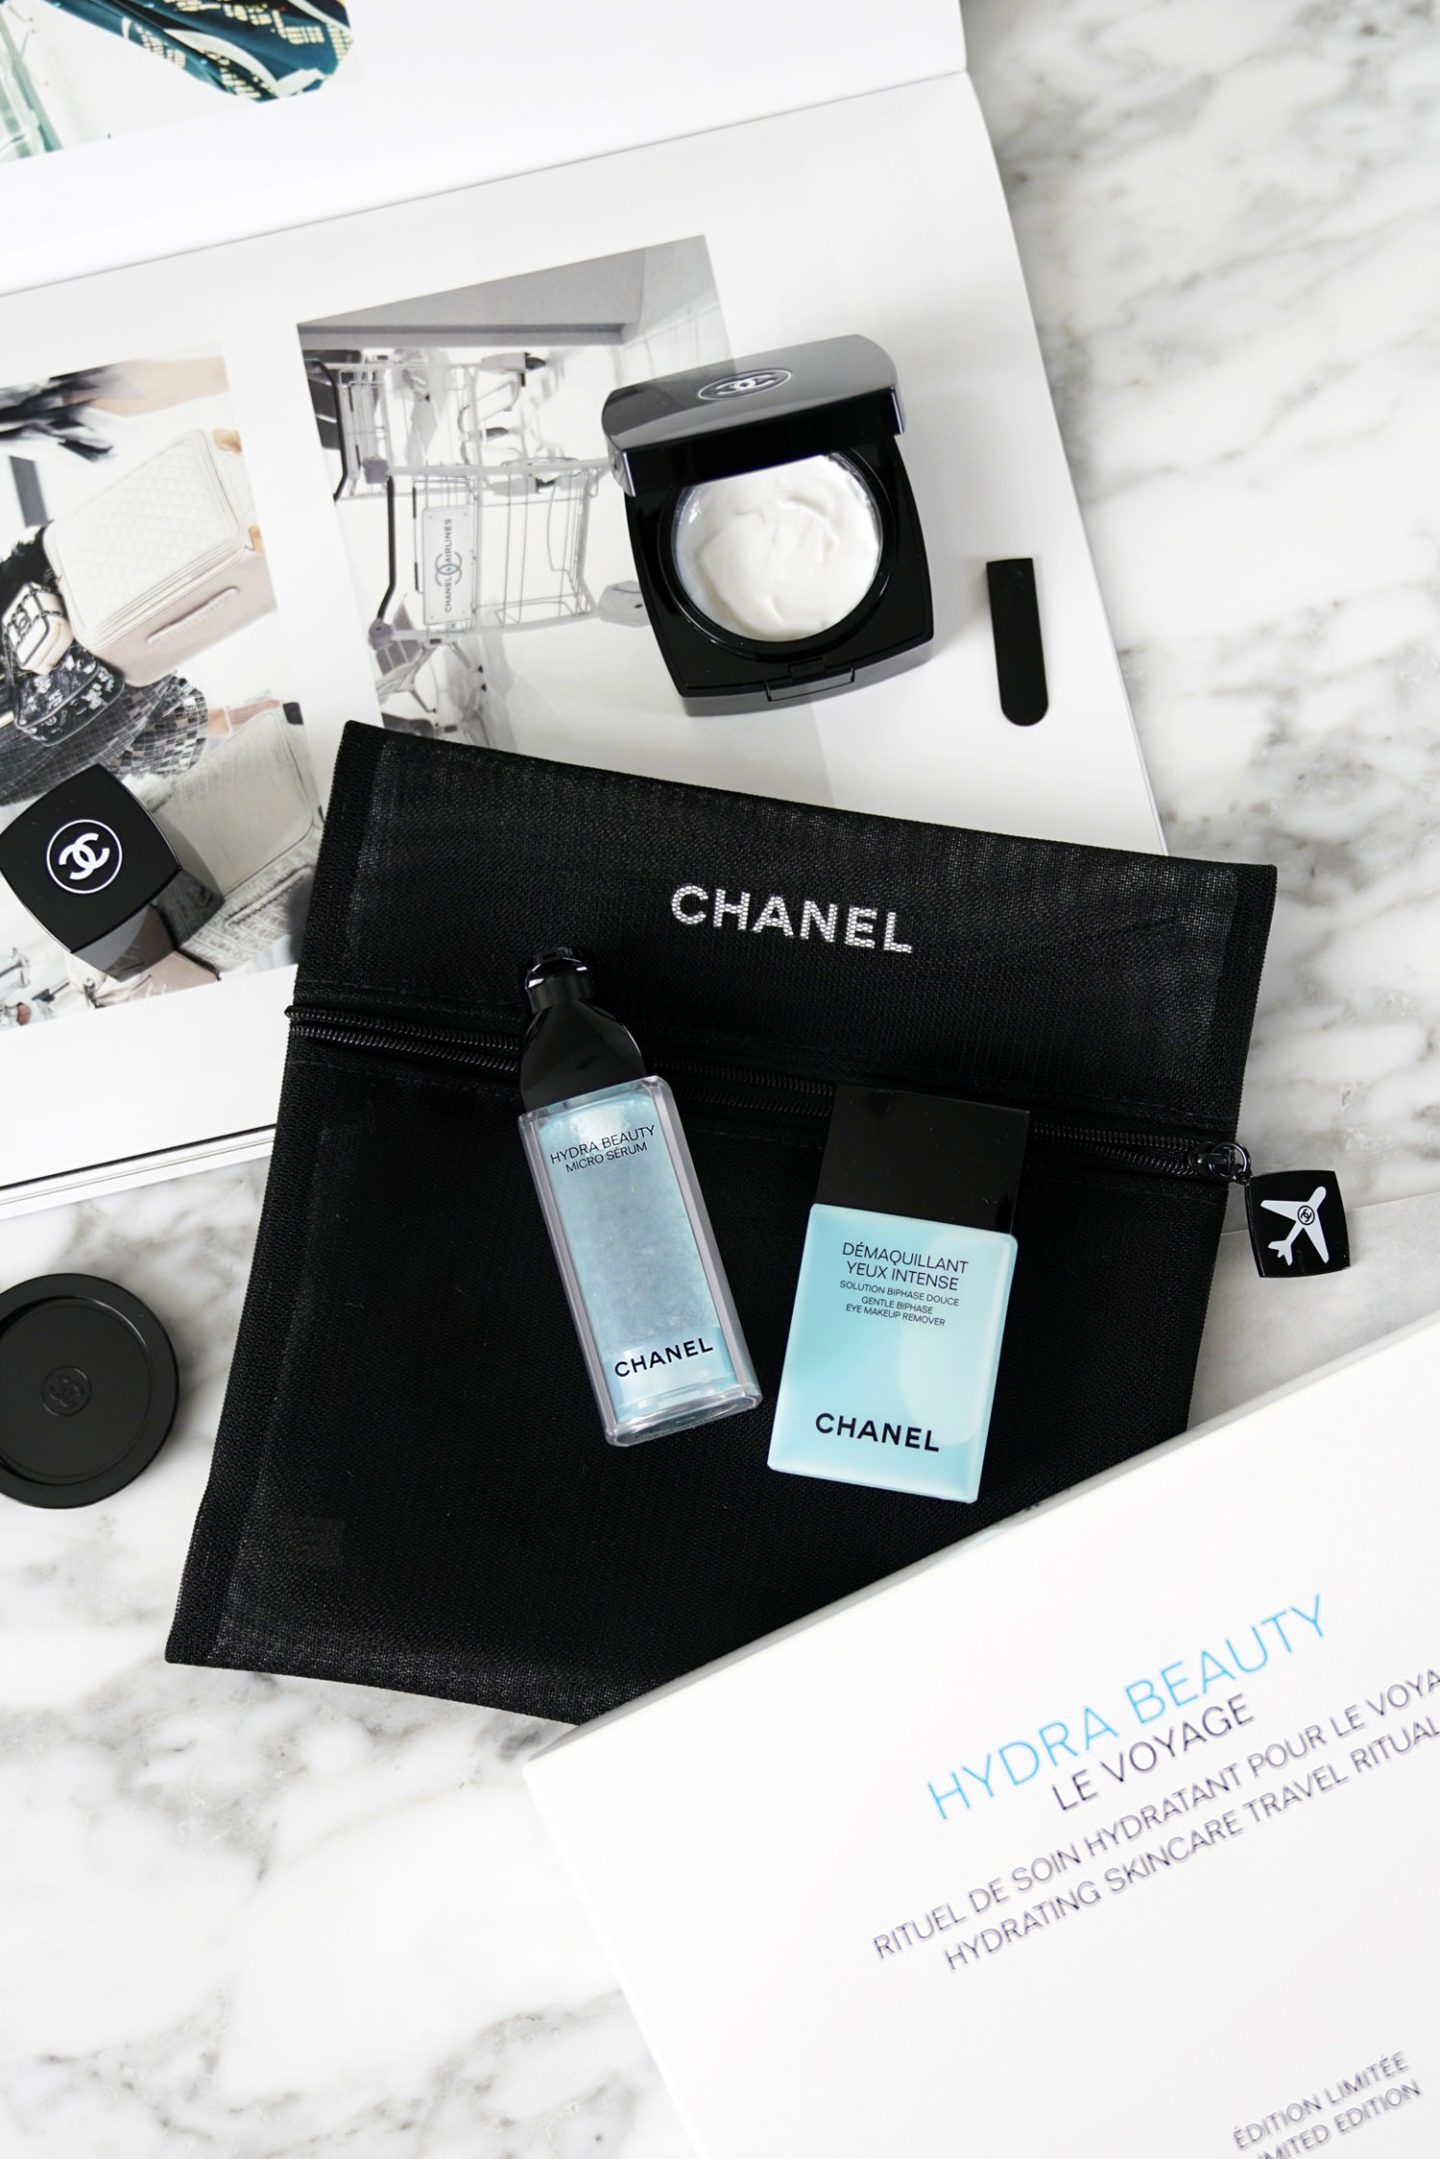 Chanel Hydra Beauty Le Voyage Set Review | The Beauty Look Book